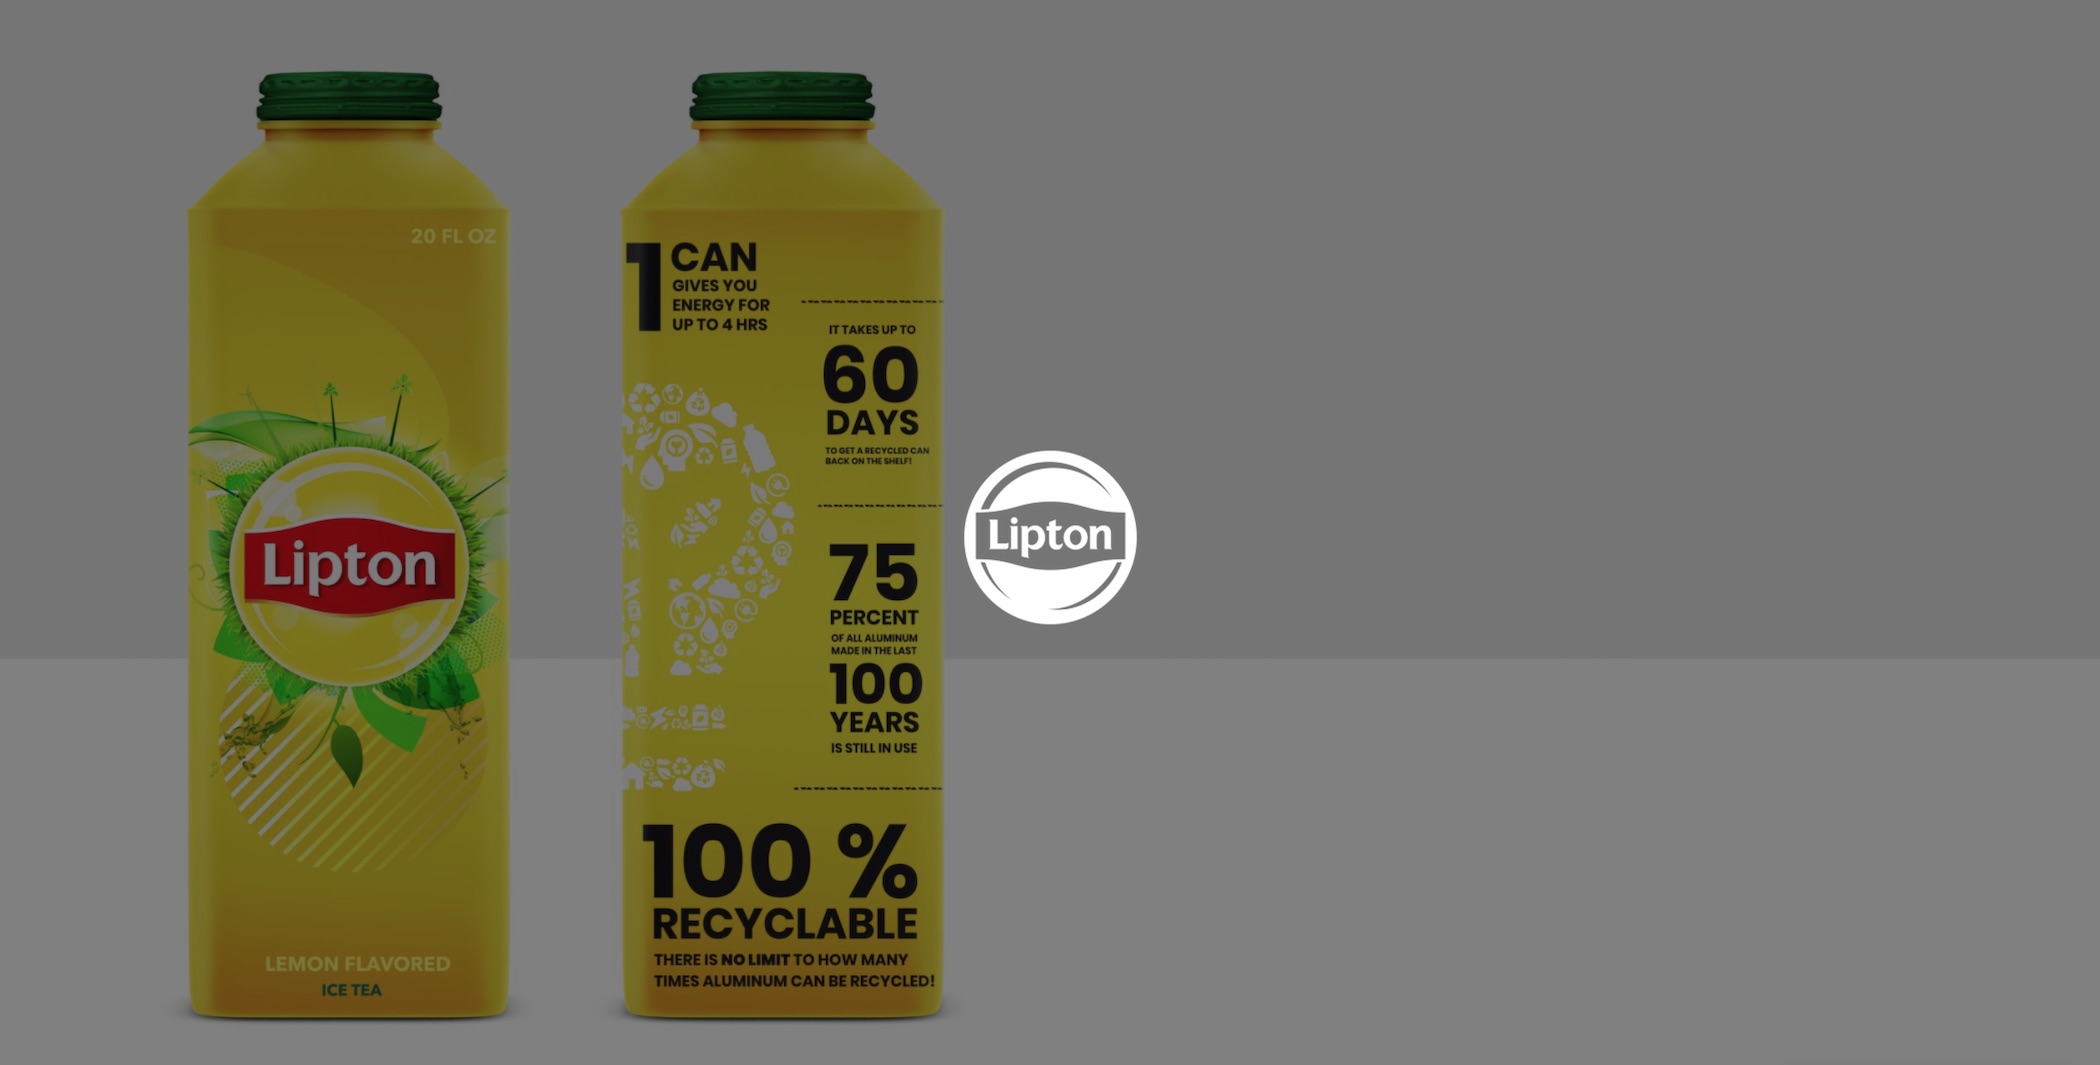 Graphic Design Services for Lipton Iced Tea White Lipton logo with dimmed background with display of front and back of Lipton container